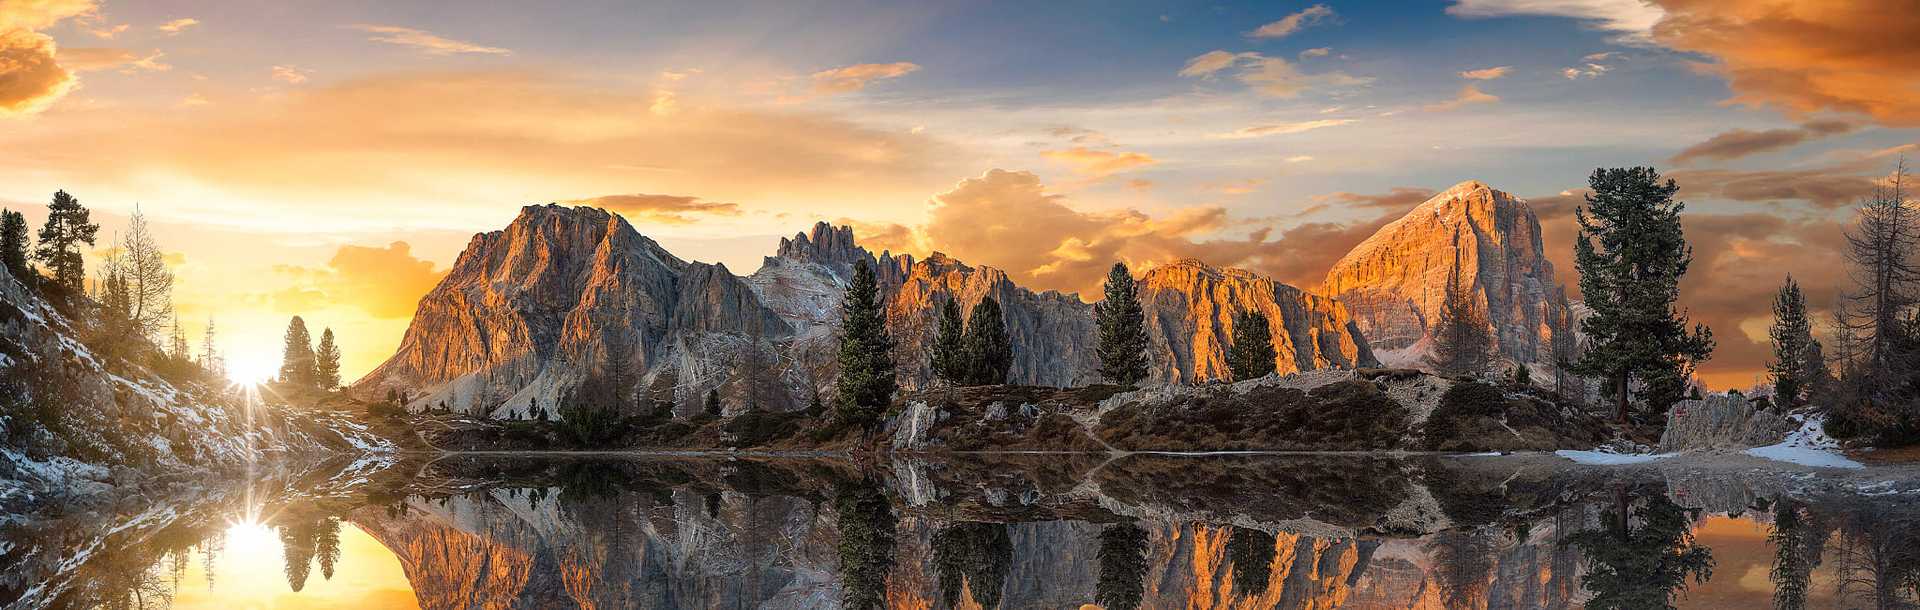 Amazing autumn sunset over Lago di Limides in the Dolomites, Italy.